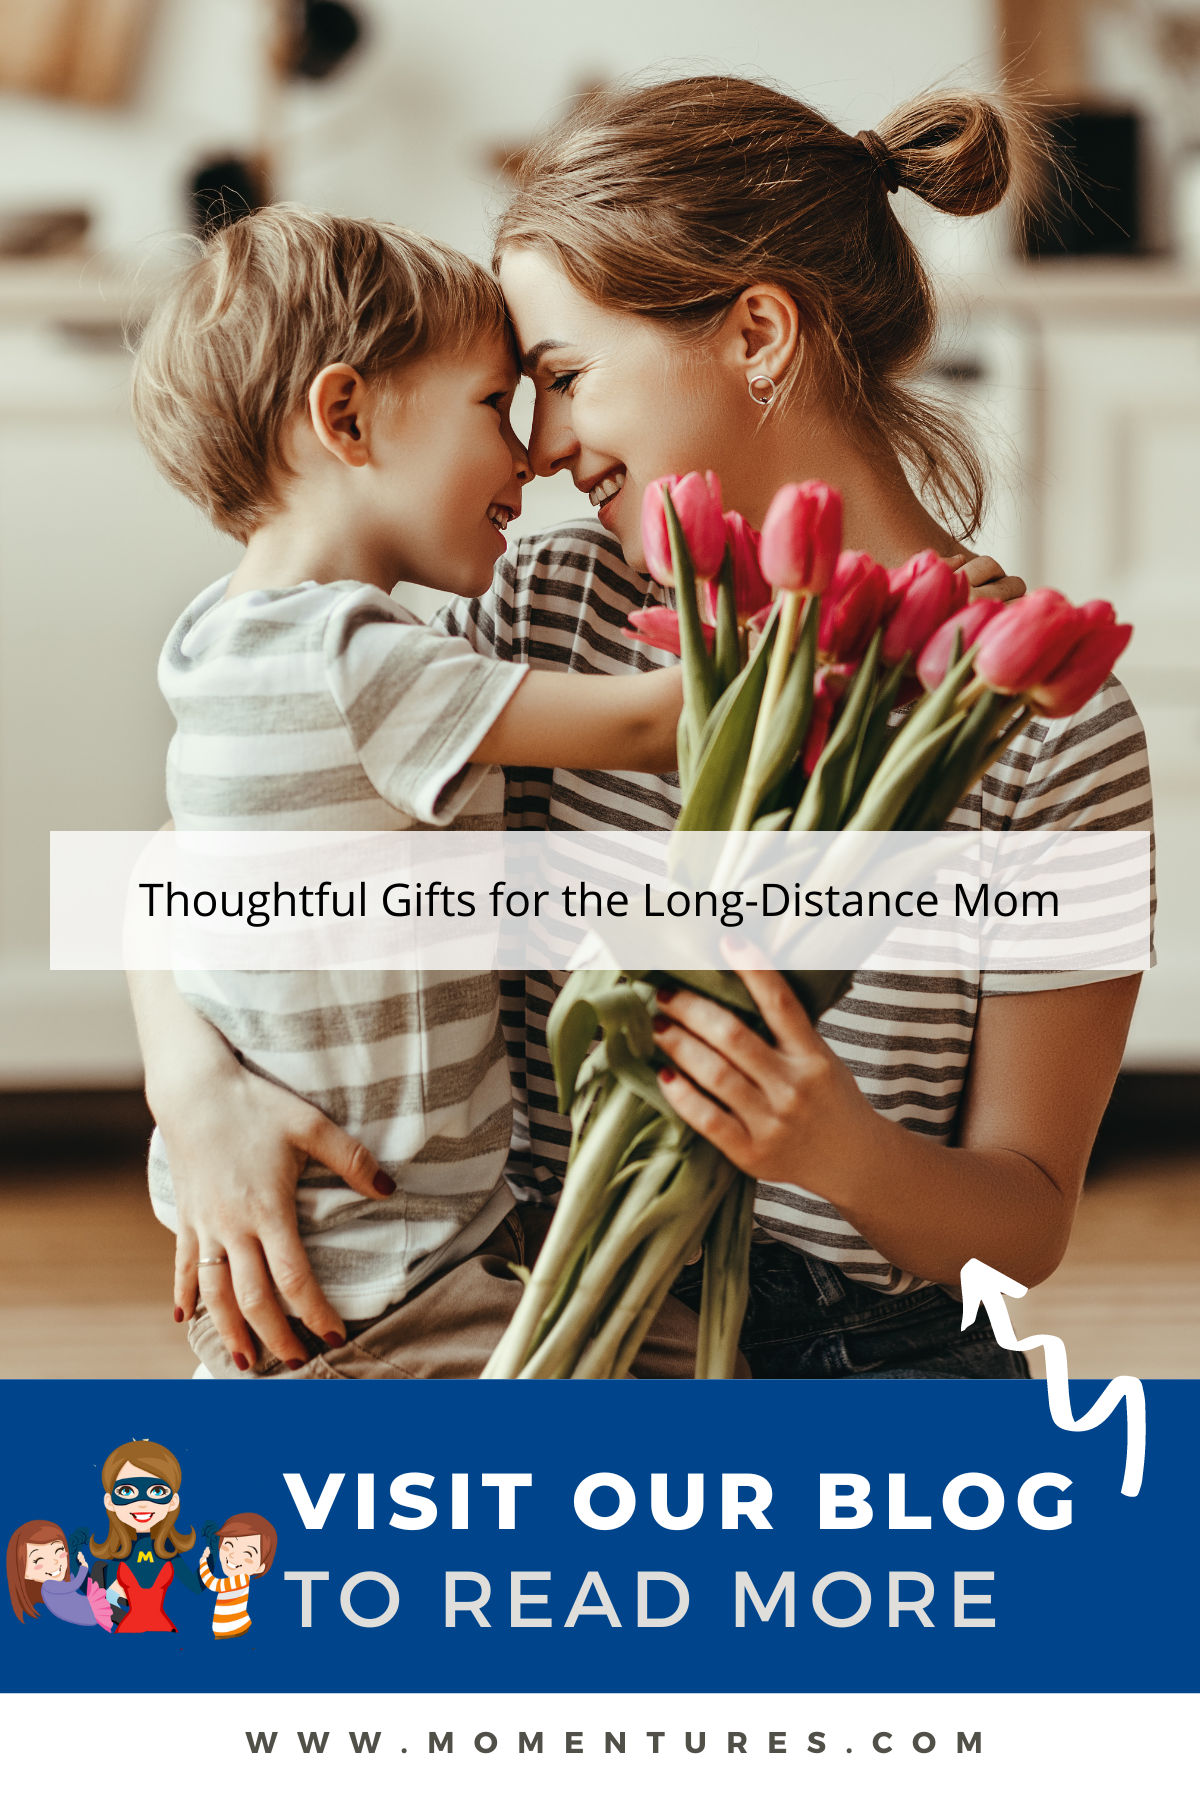 Thoughtful Gifts for the Long-Distance Mom